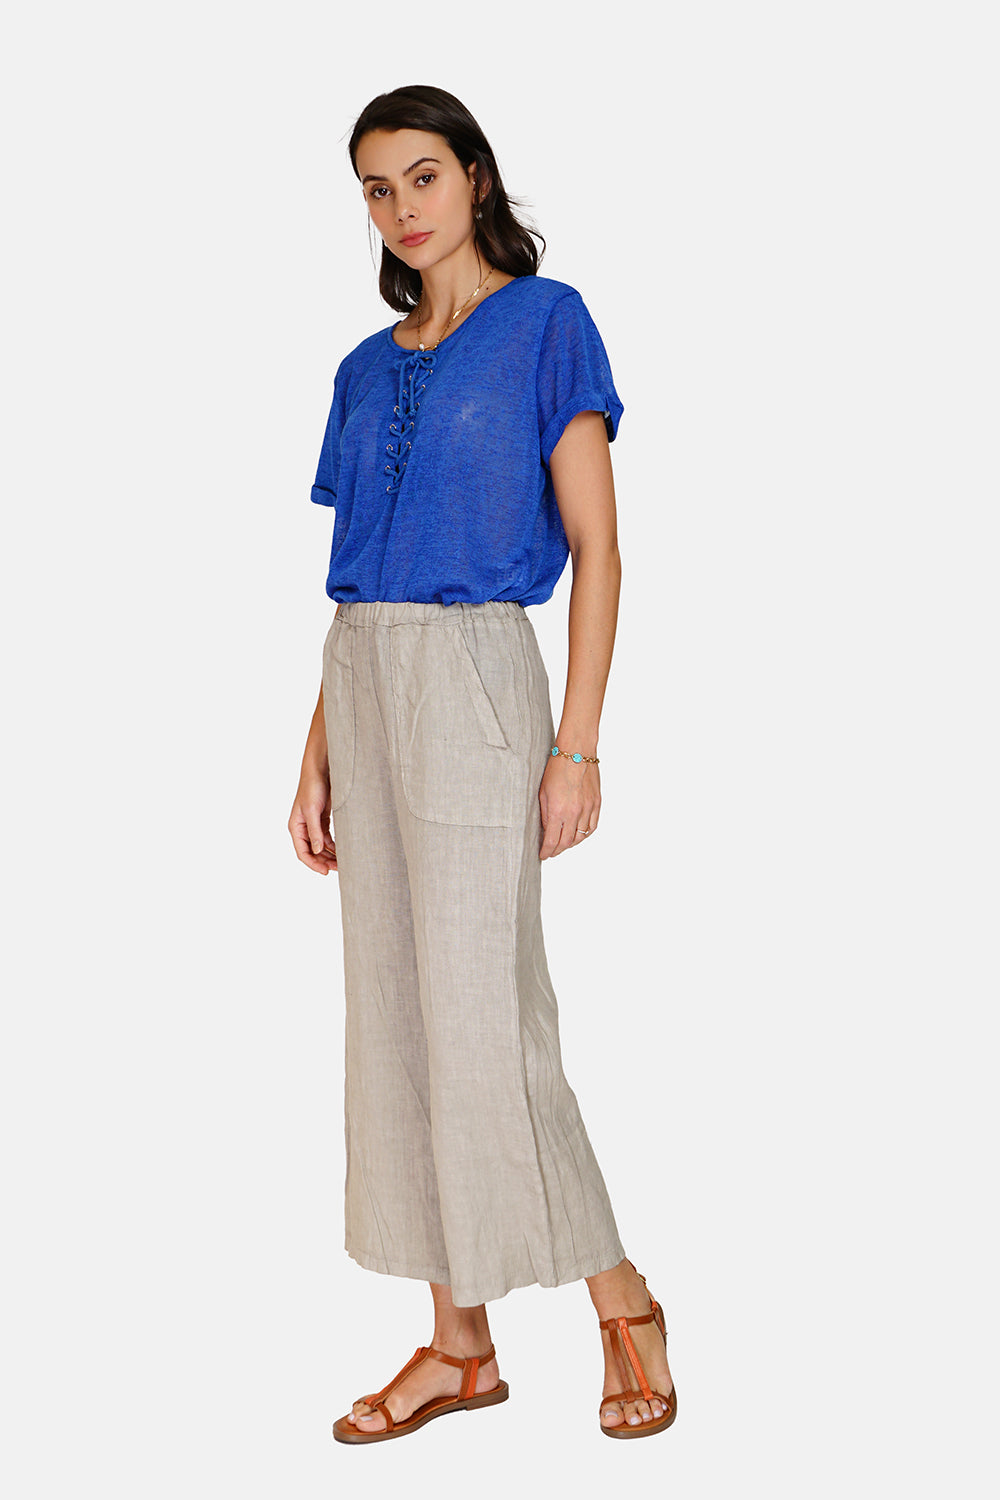 High-waisted wide-leg pants, front patch pockets